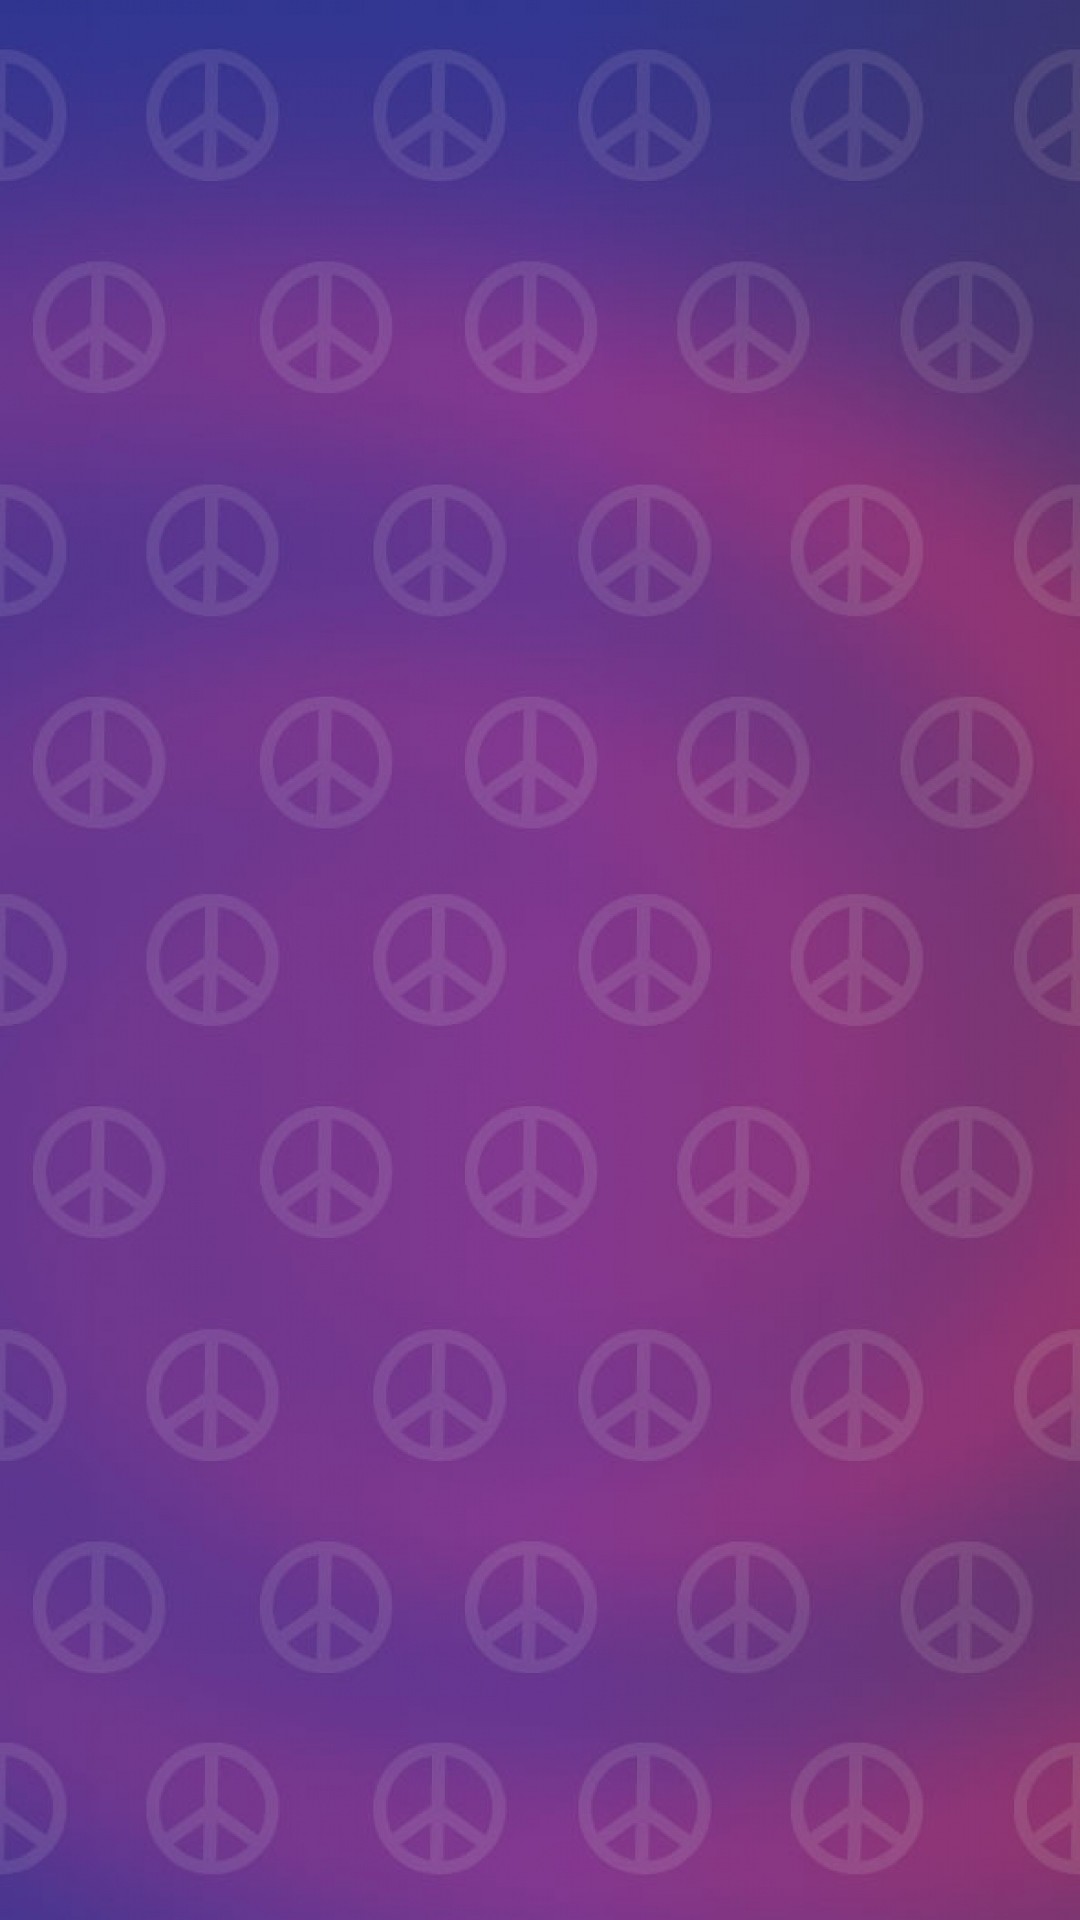 Peace Signs Backgrounds (46+ images)